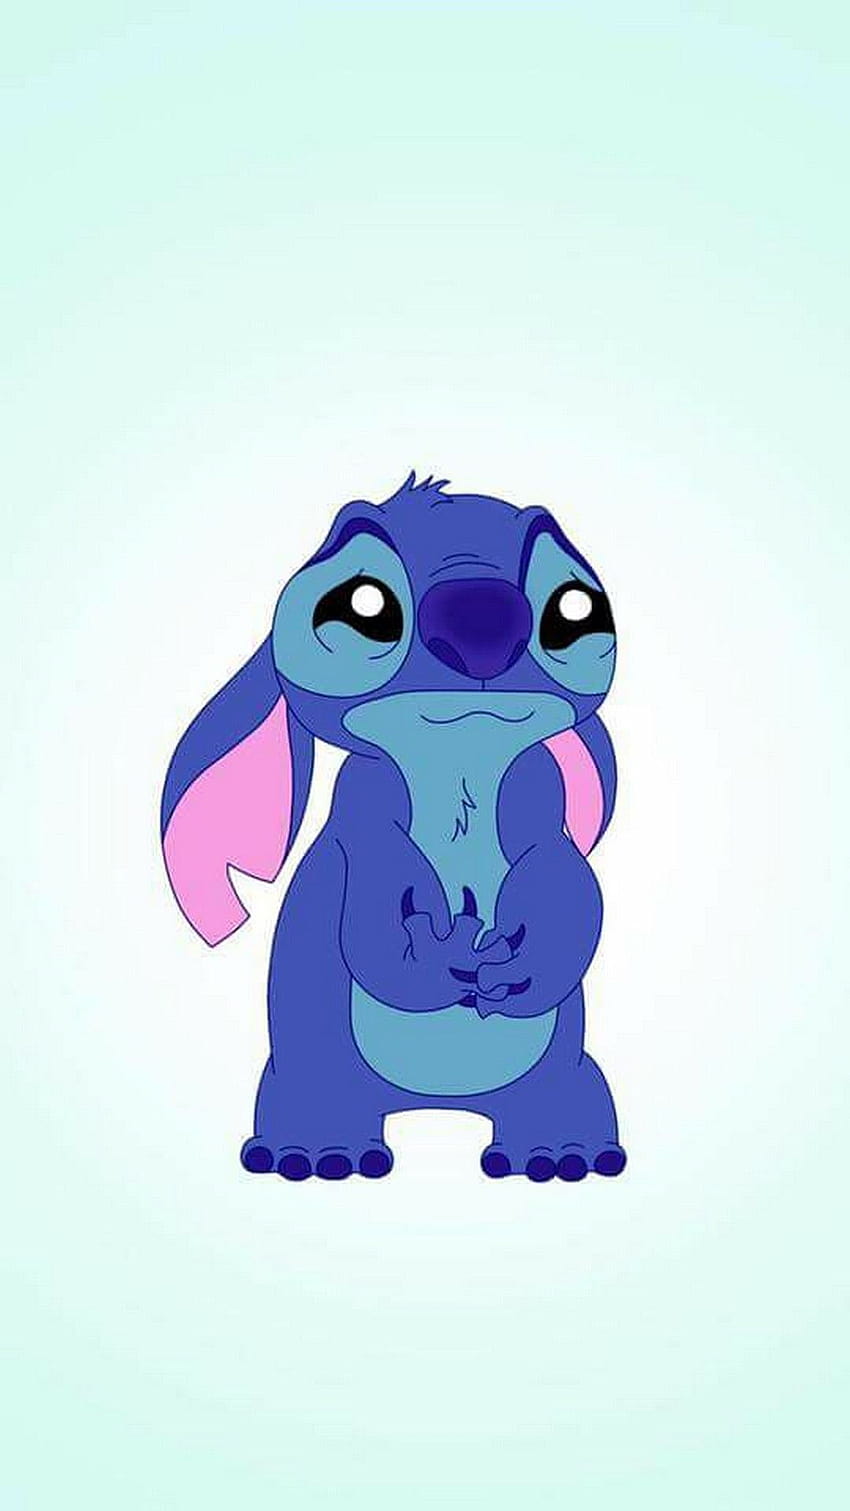 50 Adorable Stitch Wallpapers : Stitch on Pastel Sky - Idea Wallpapers ,  iPhone Wallpapers,Color Schemes